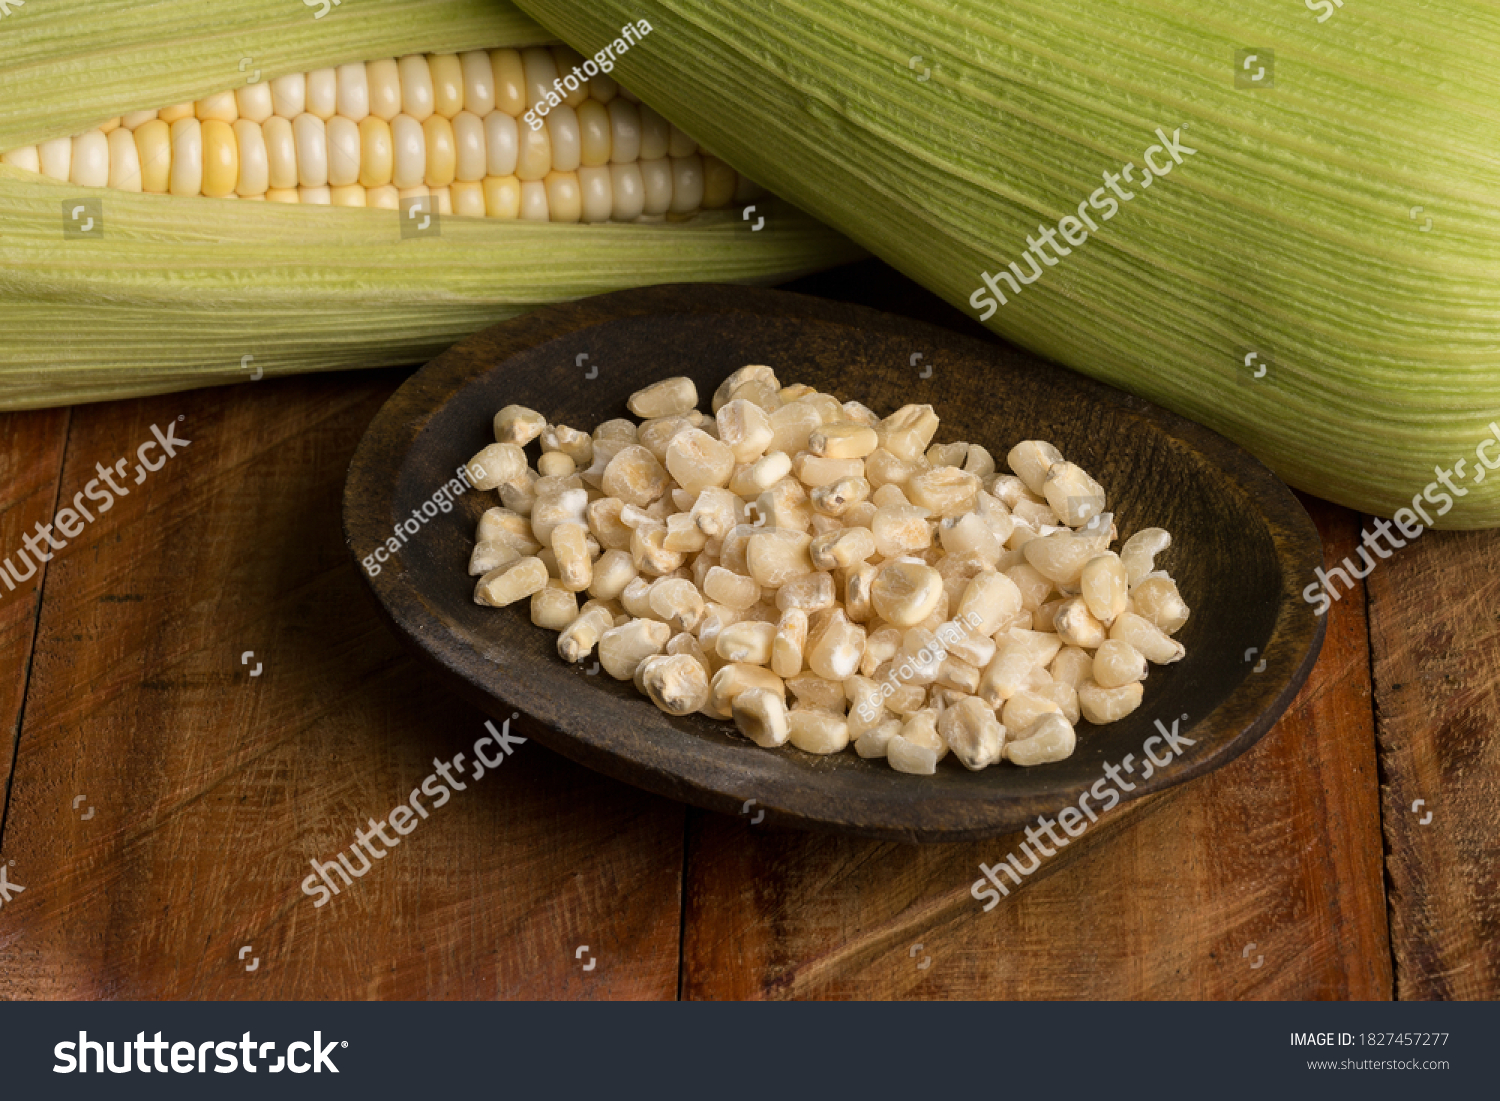 Zea mays - Wooden bowl with raw corn kernels, on wooden background. #1827457277